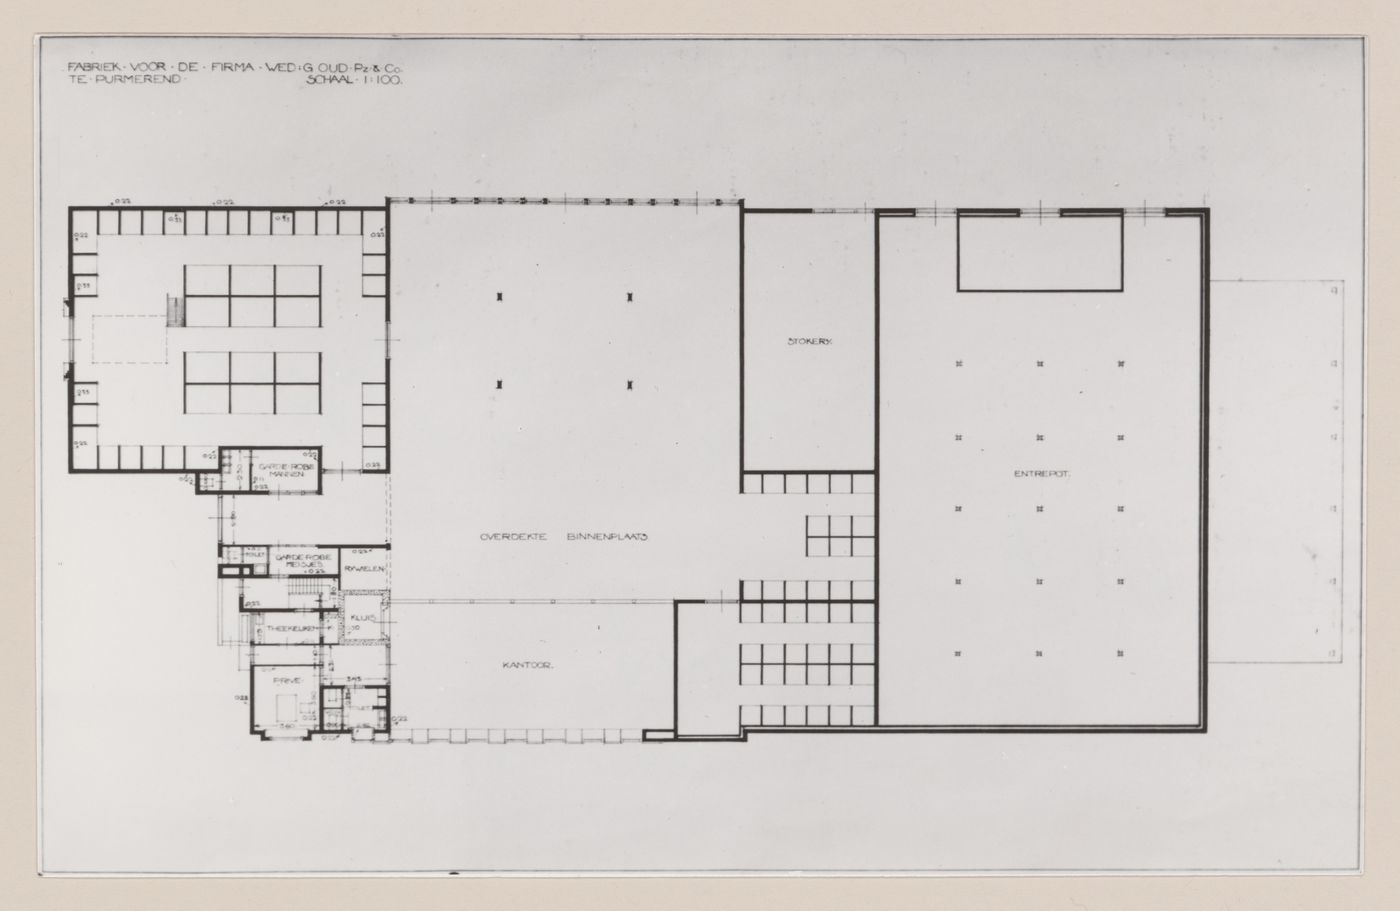 Photograph of a ground floor plan for a winery, Purmerend, Netherlands